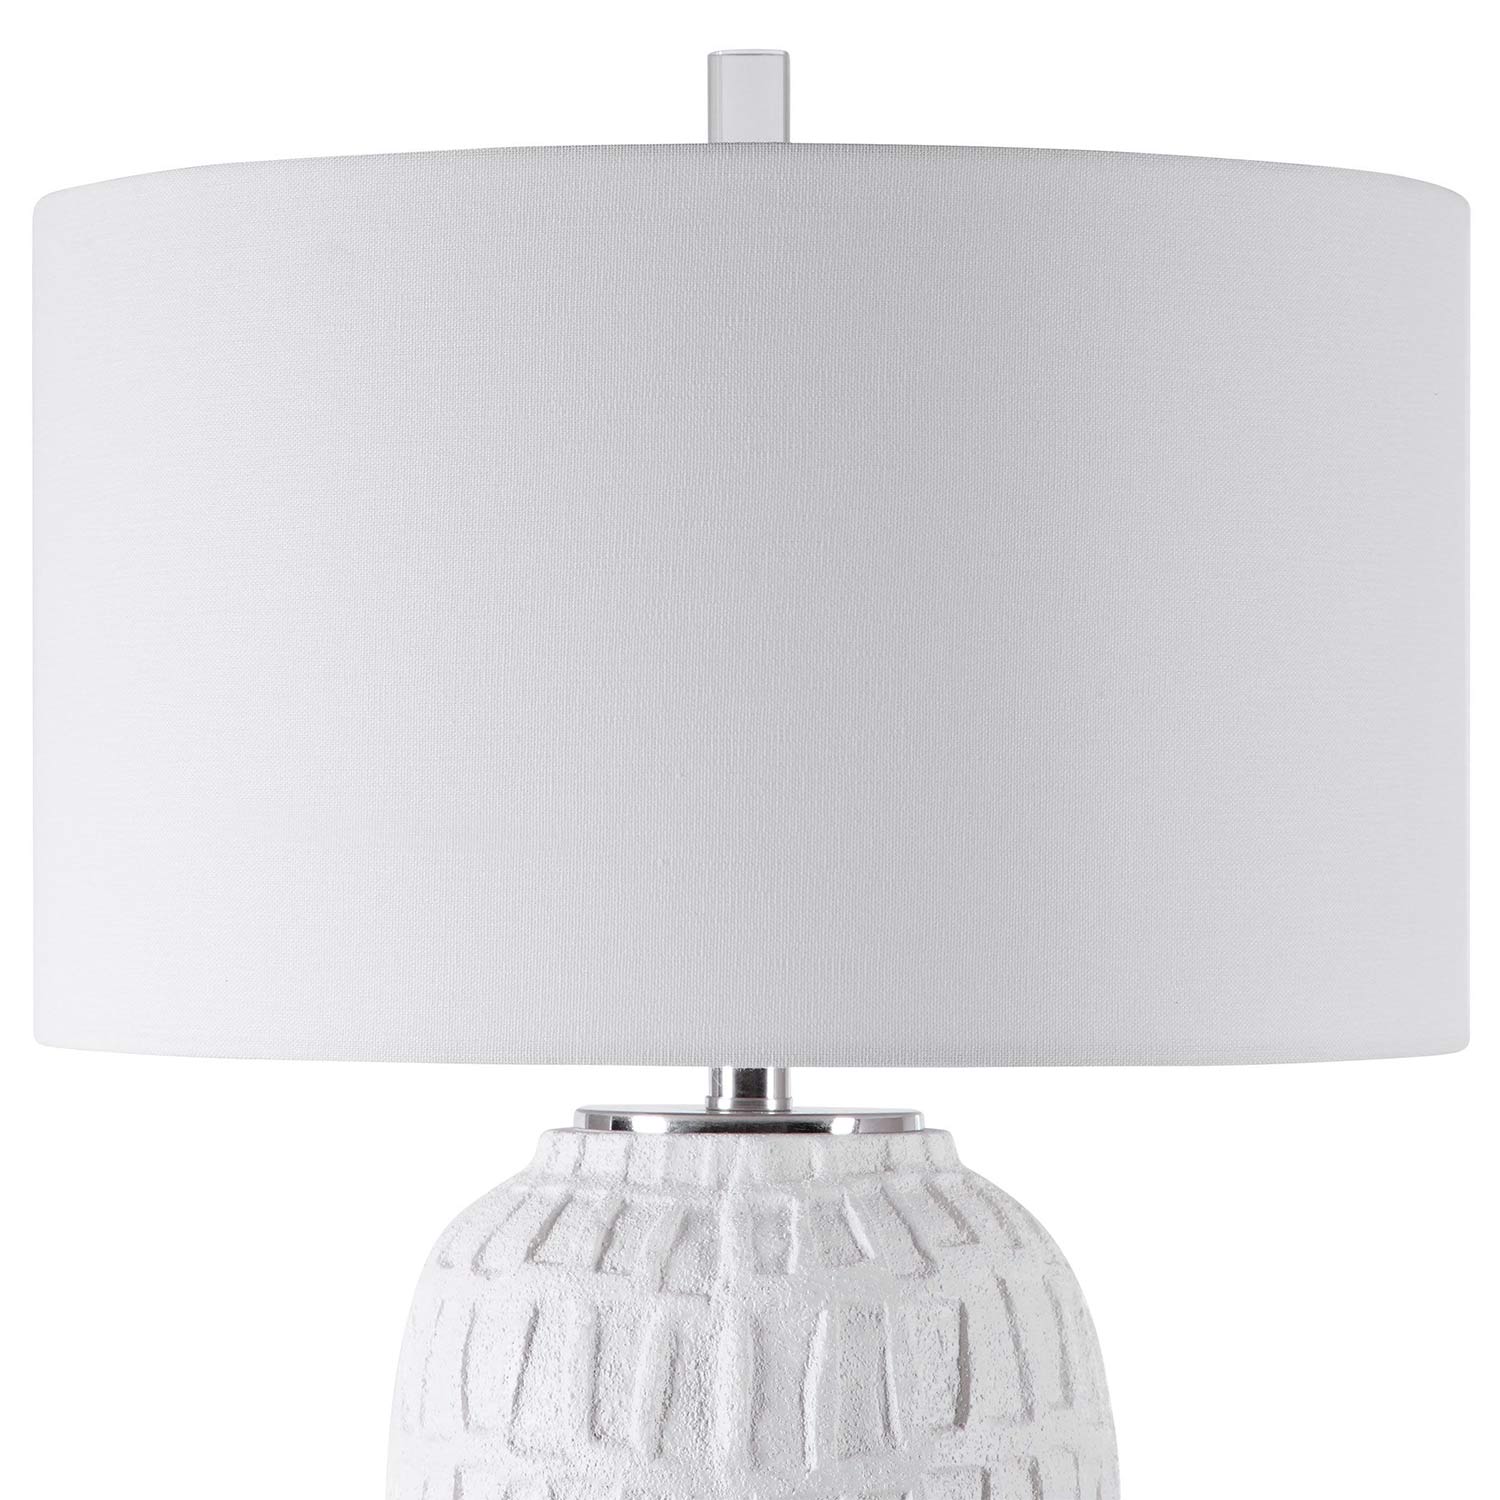 Uttermost Caelina Table Lamp - Textured White